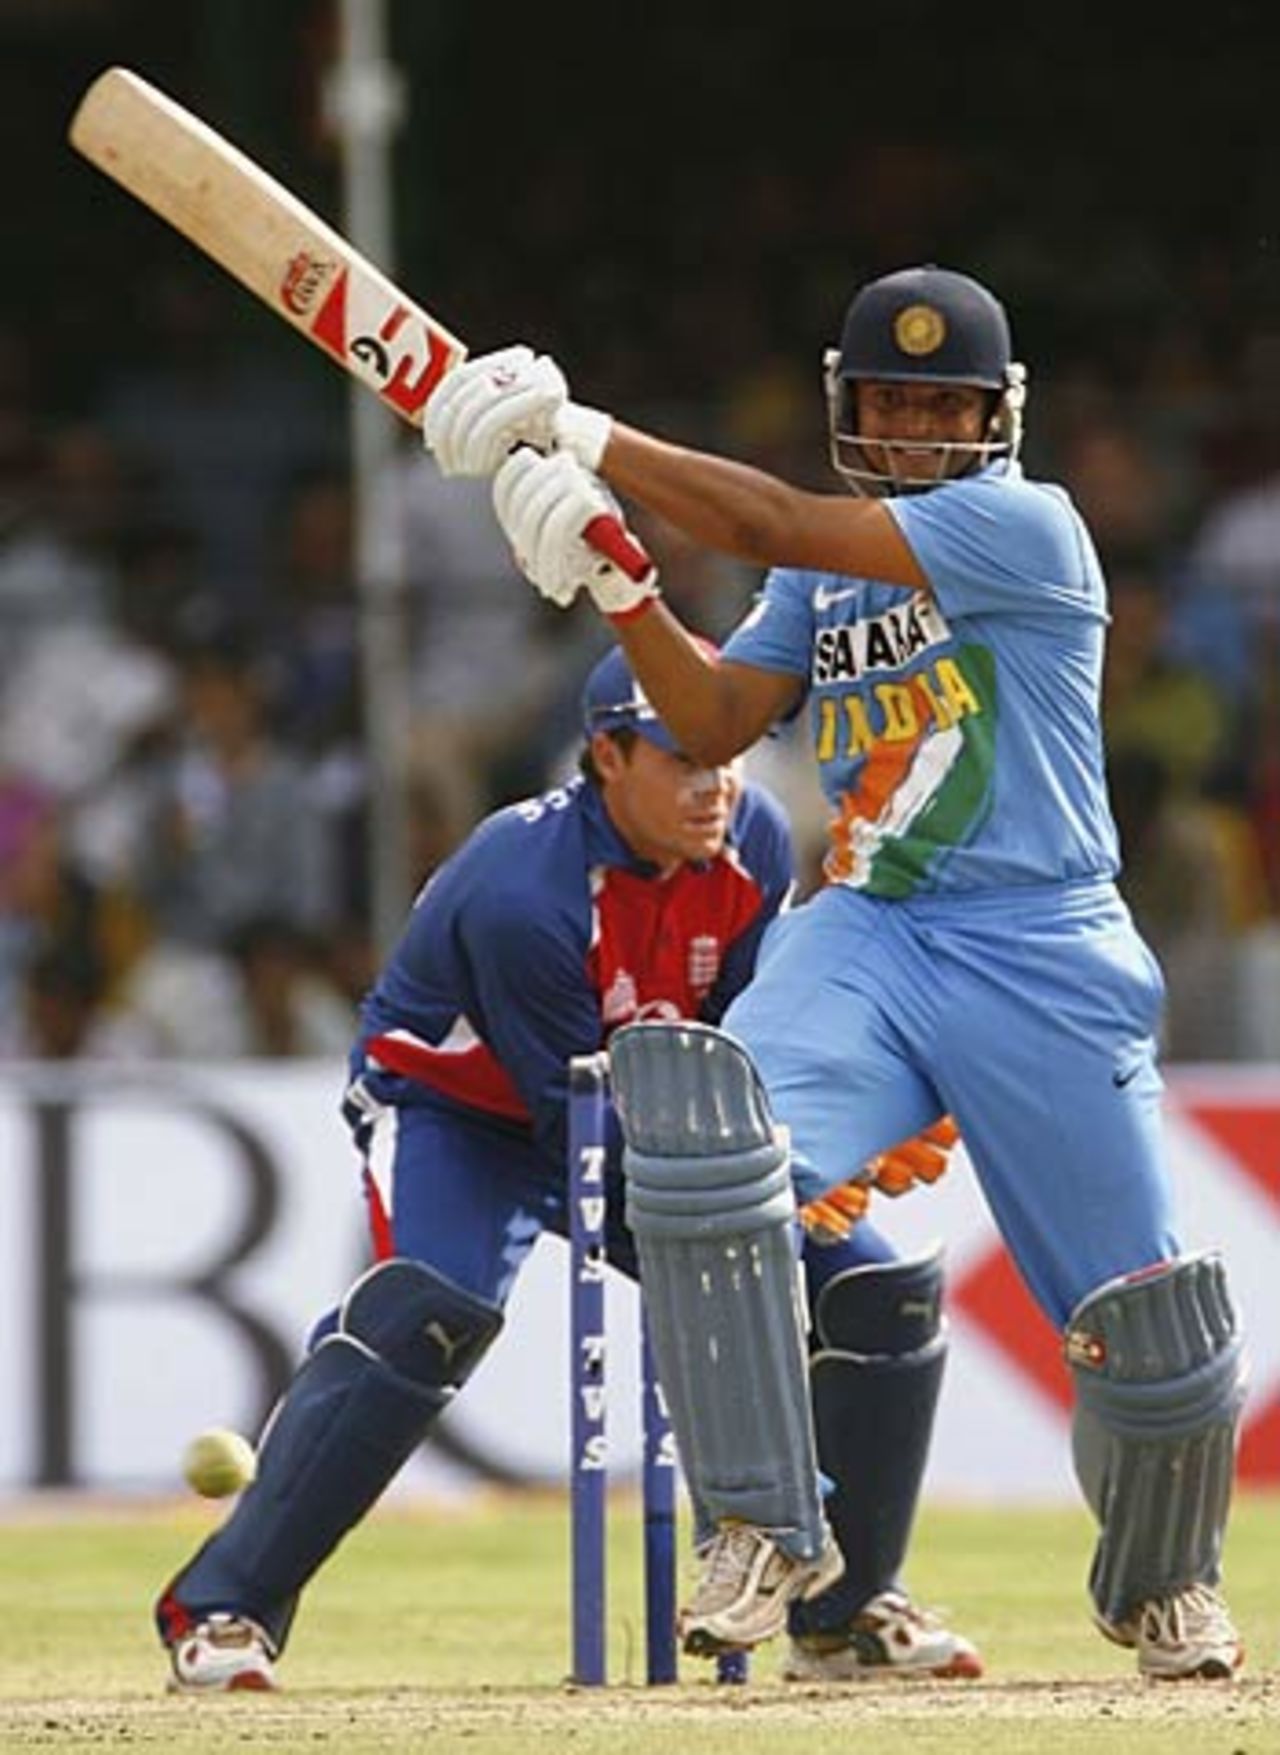 Suresh Raina hammers a four on his way to 53, India v England, 7th ODI, Indore, April 15 2006